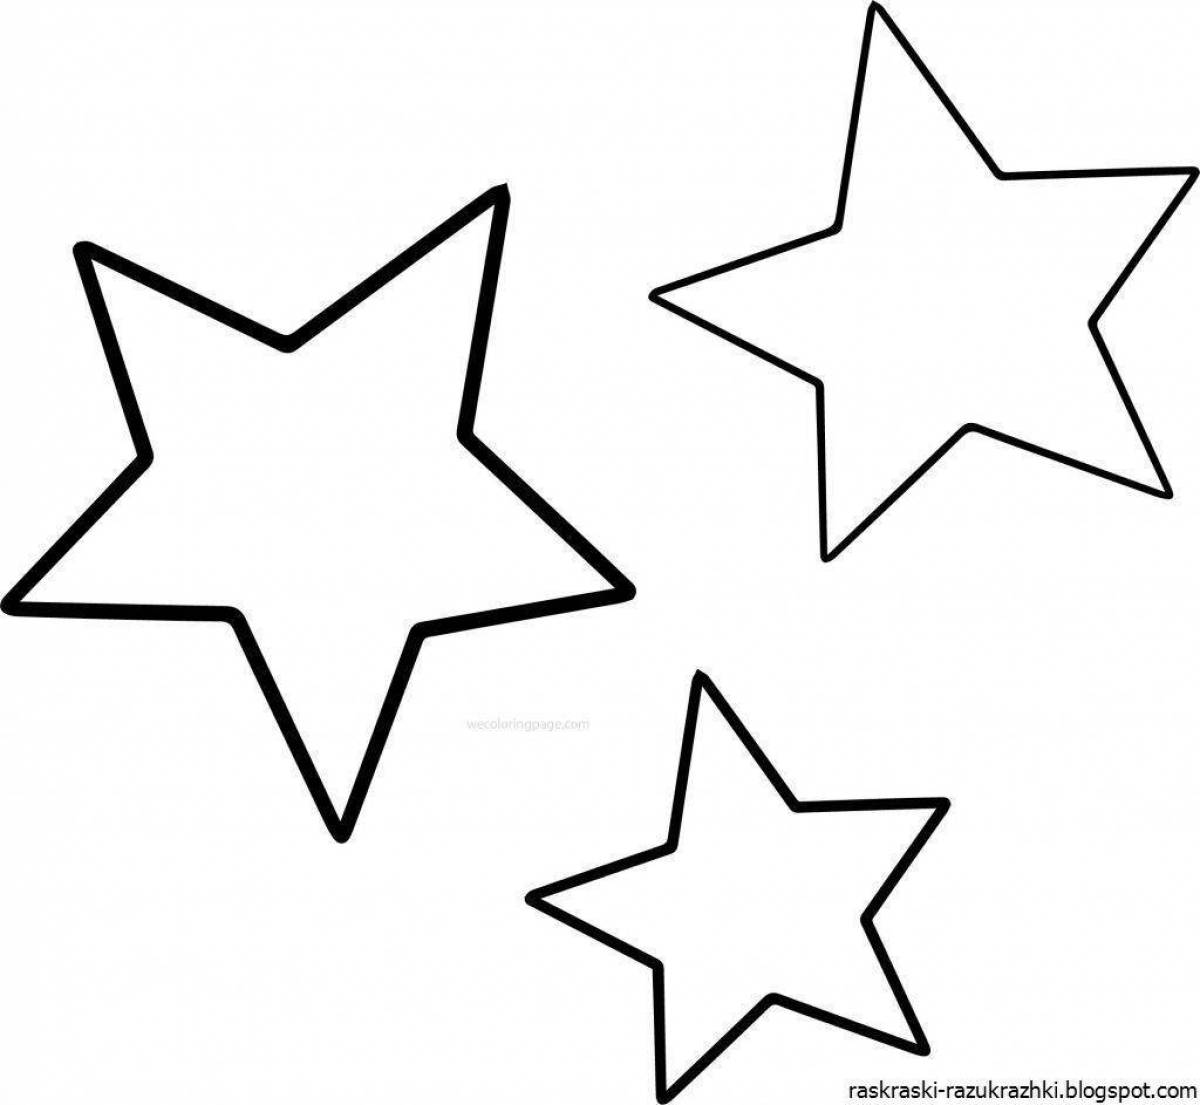 Fun coloring book star for preschoolers 3-4 years old